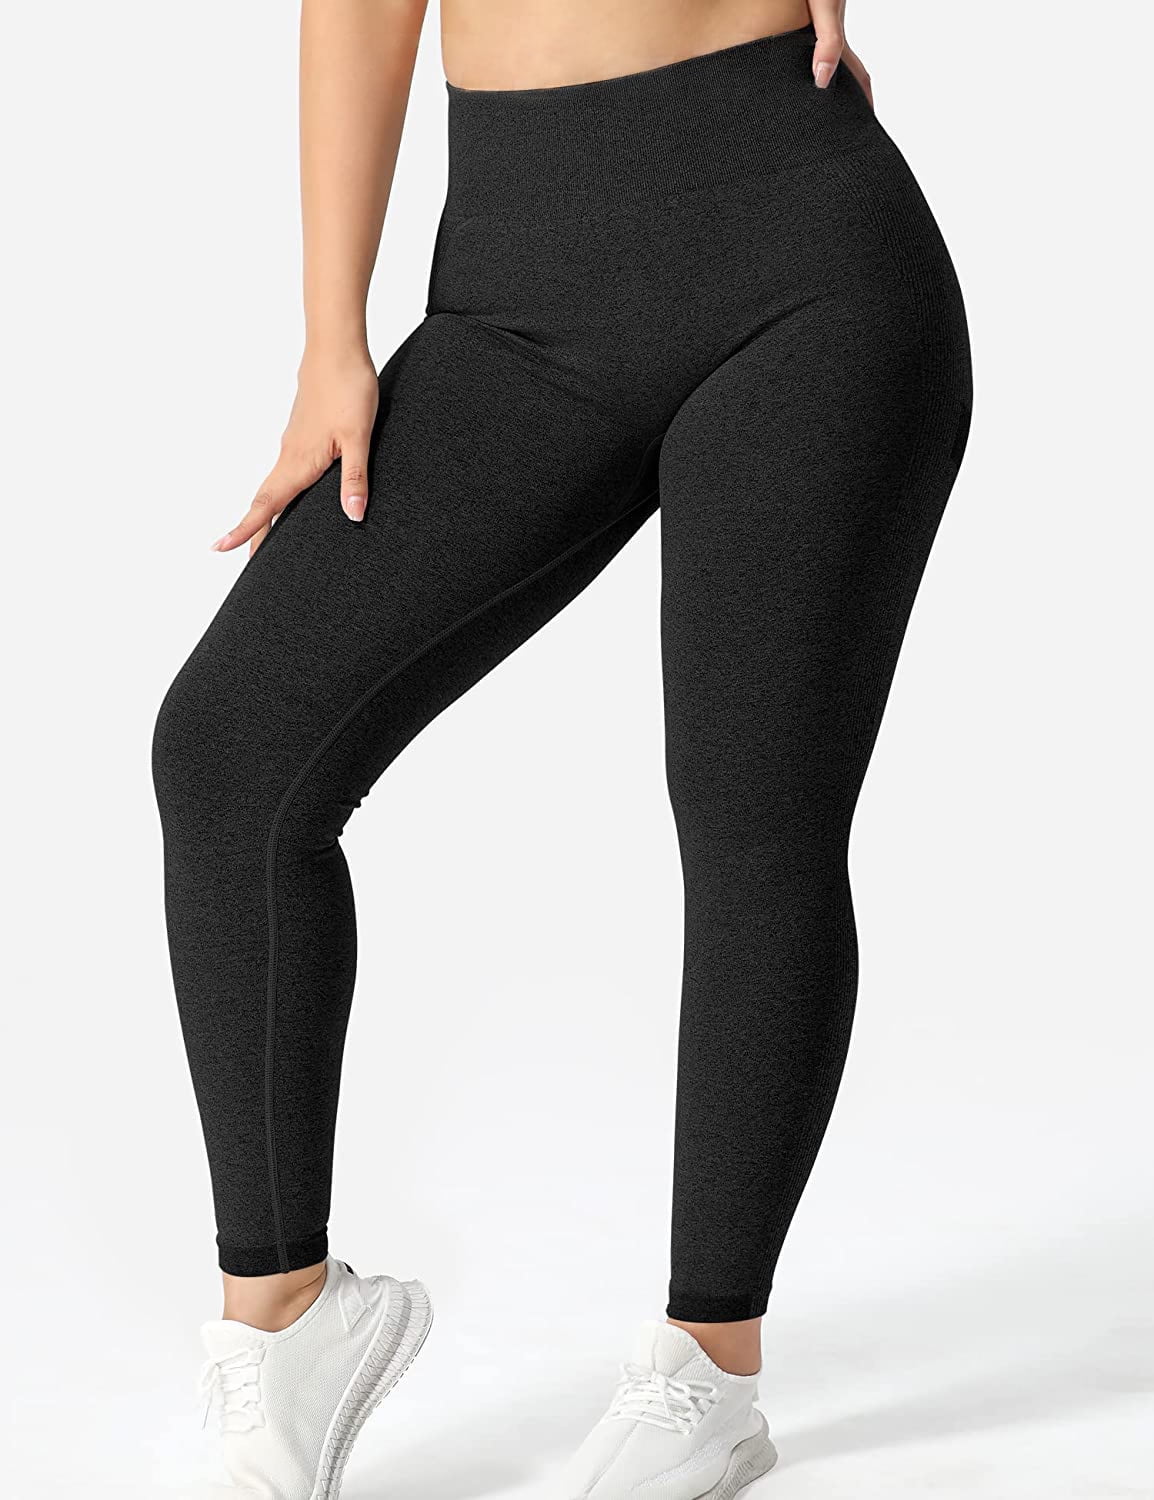 CHRLEISURE High Waist Compression Seamless High Waisted Black Leggings For  Women Stretchy Push Up Pants For Running, Fitness, And Exercise 211008 From  Lu006, $14.91